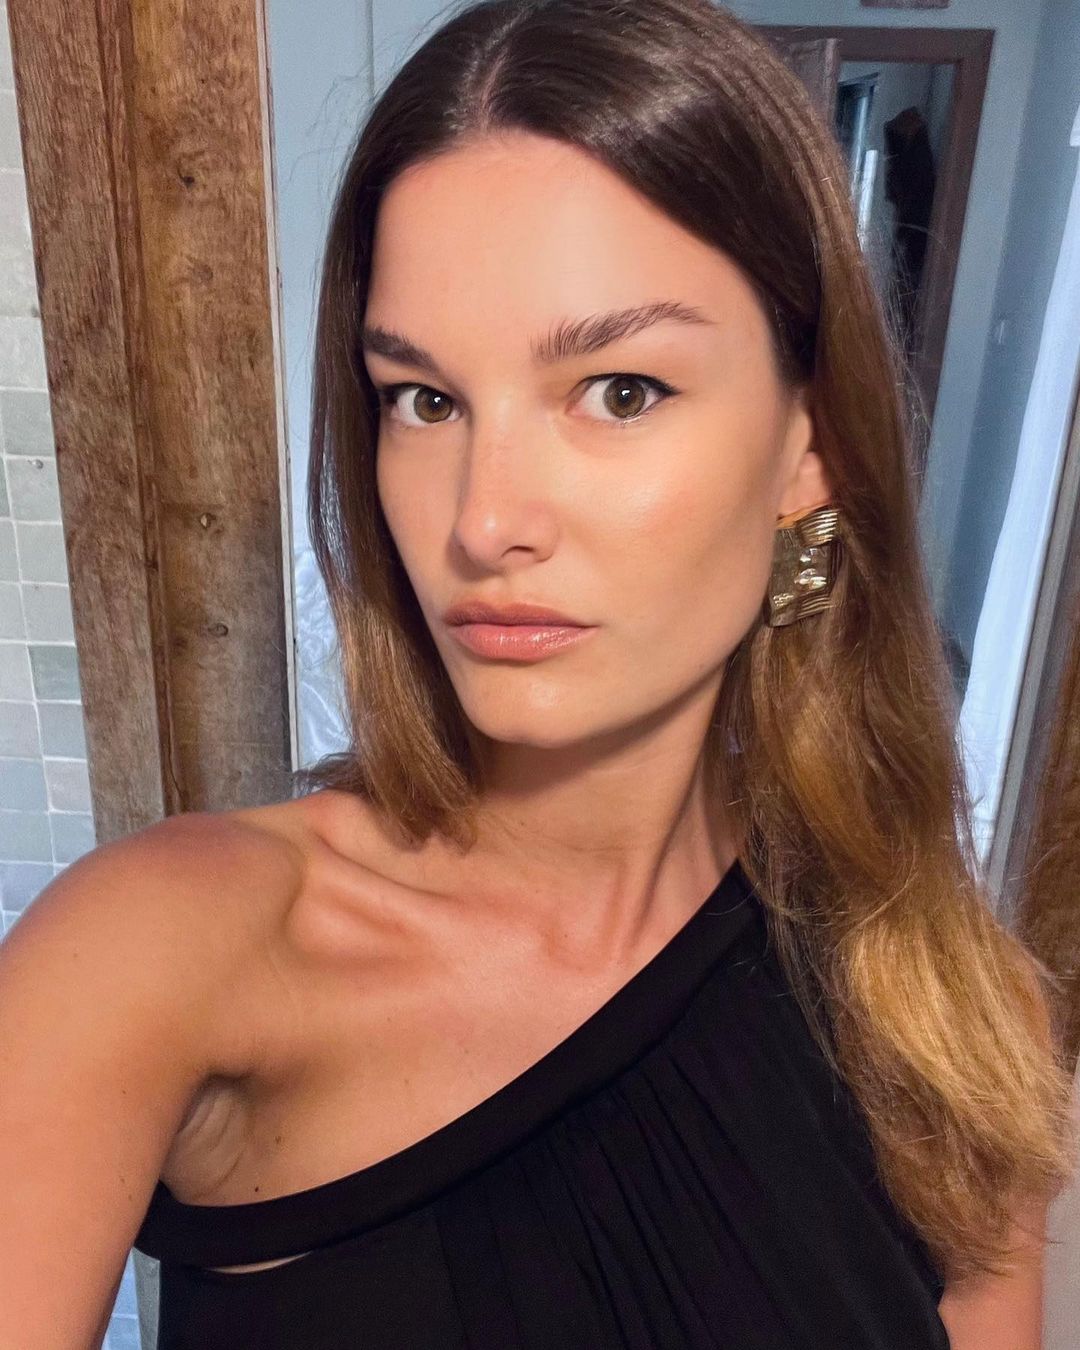 Ophelie guillermand 16 hottest pics, ophelie guillermand 16 instagram